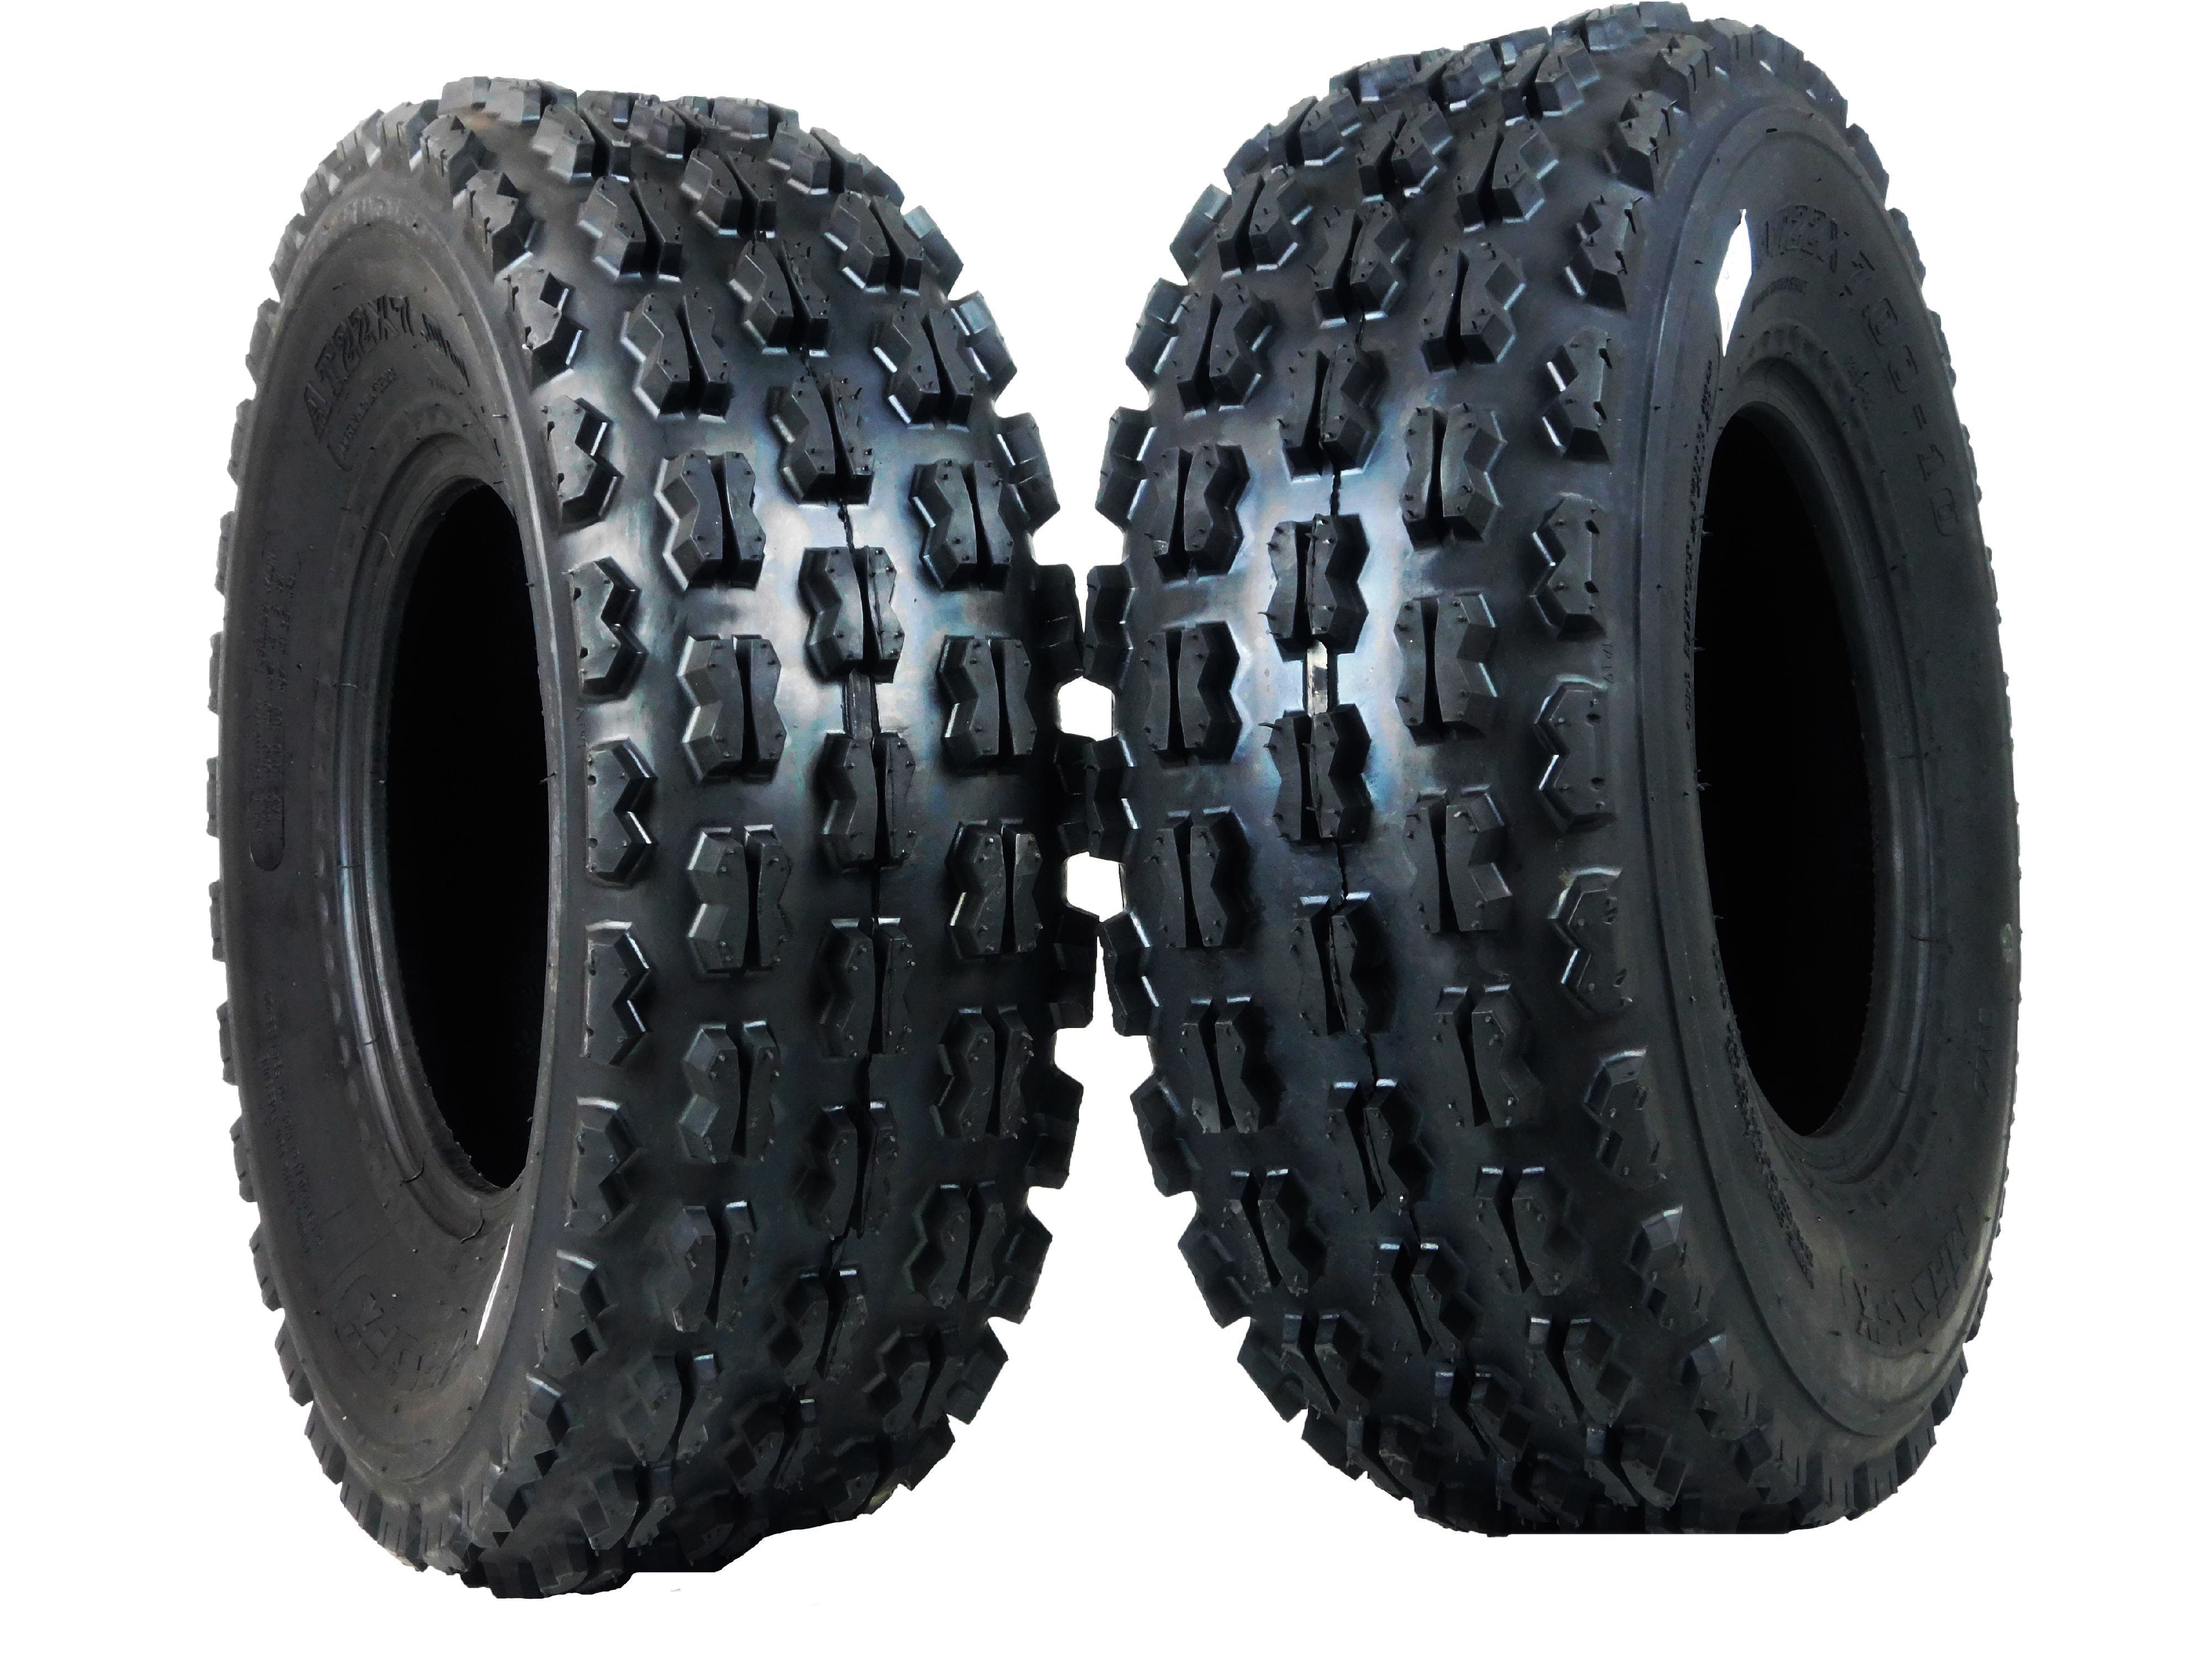 Set of 2 Front ATV Tires 4PR Tubeless 21x7-10 or 21x7x10 4ply P348 205 lbs 21x7x10 Tire 